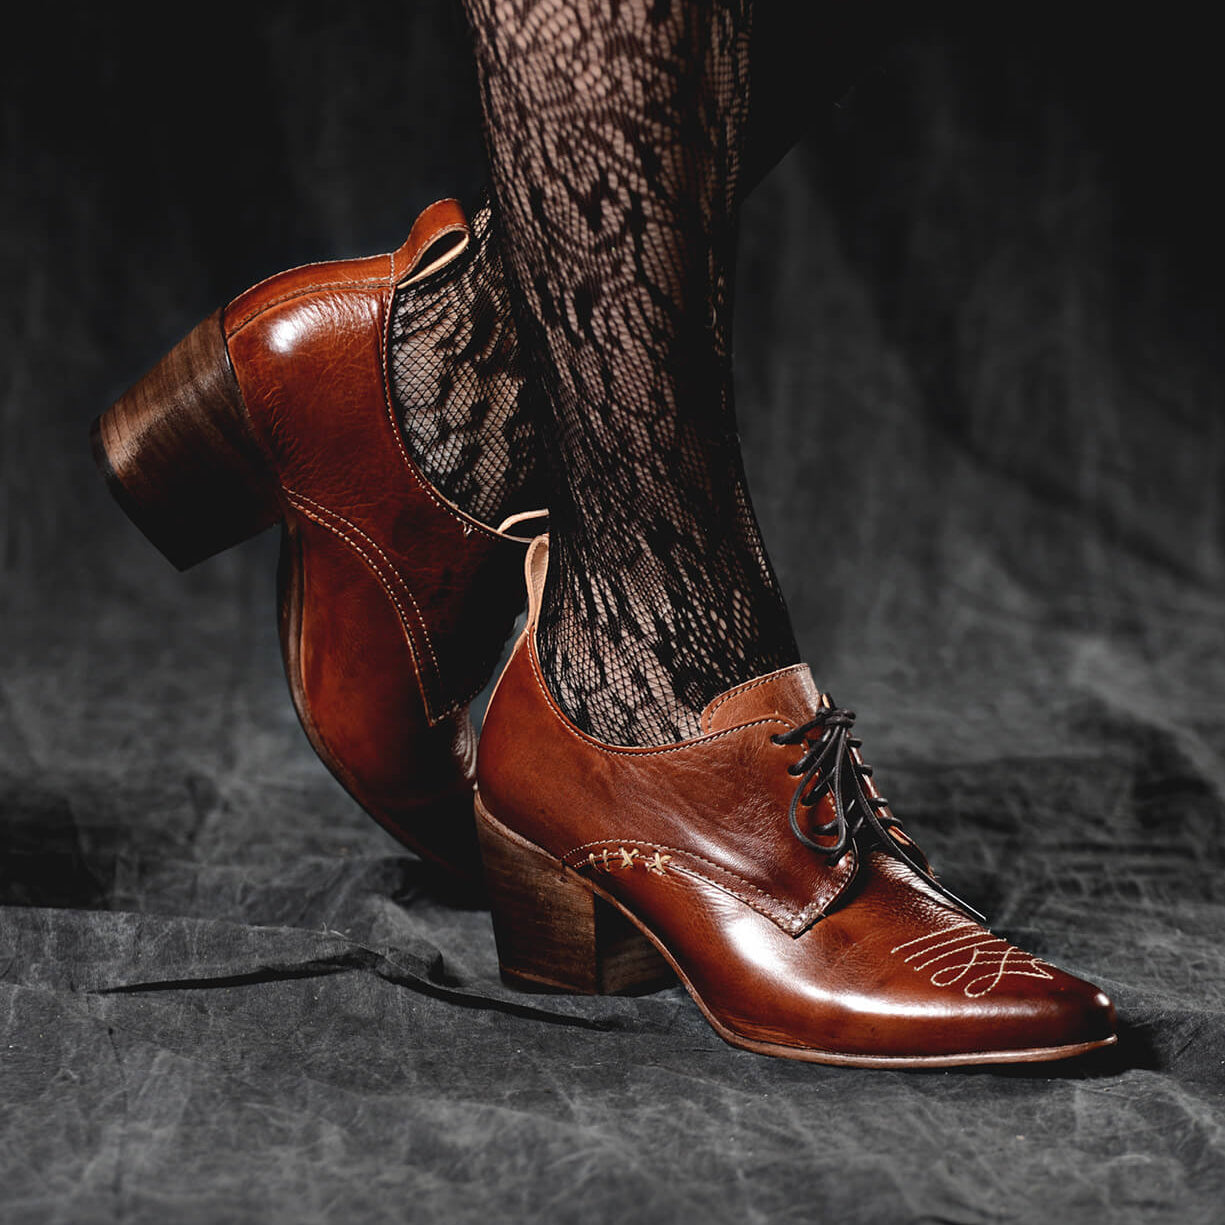 A woman wearing lace stockings and a pair of Oak Tree Farms Braunstone oxford dress shoes with a Victorian inspired silhouette.